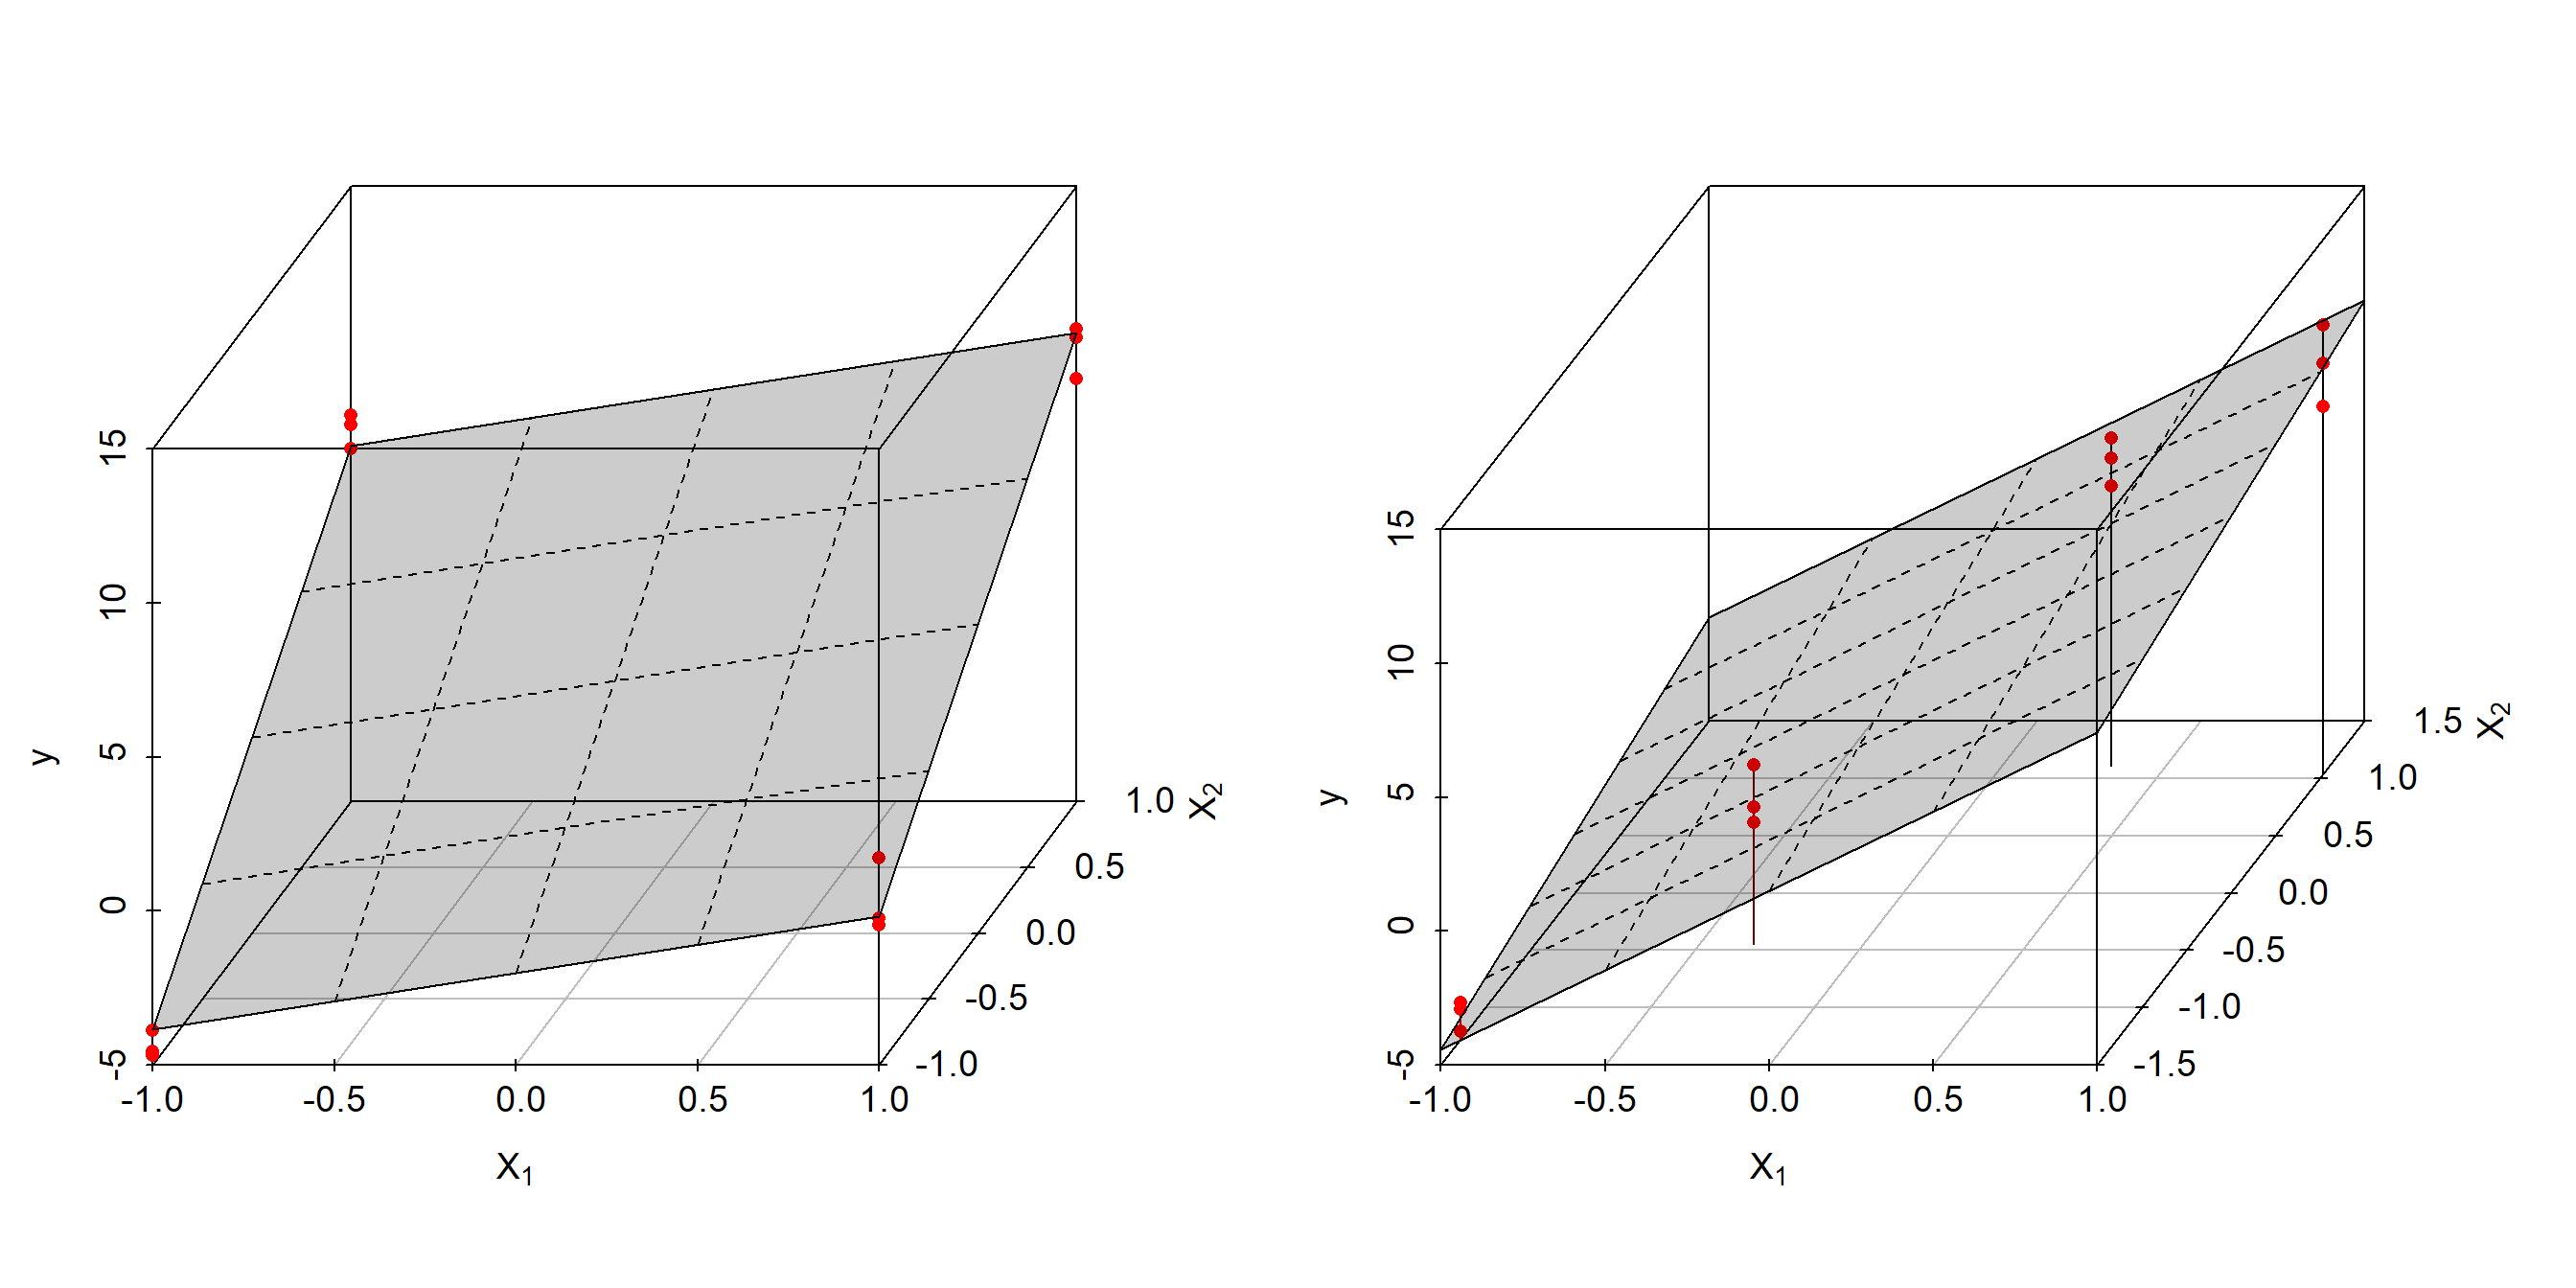 Linear OLS model $y=a_{0} + a_{1} \cdot x_{1} + a_{2} \cdot x_{2}$ based on orthogonal $design_{1}$ (left panel) and collinear $design_{2}$ (right panel)